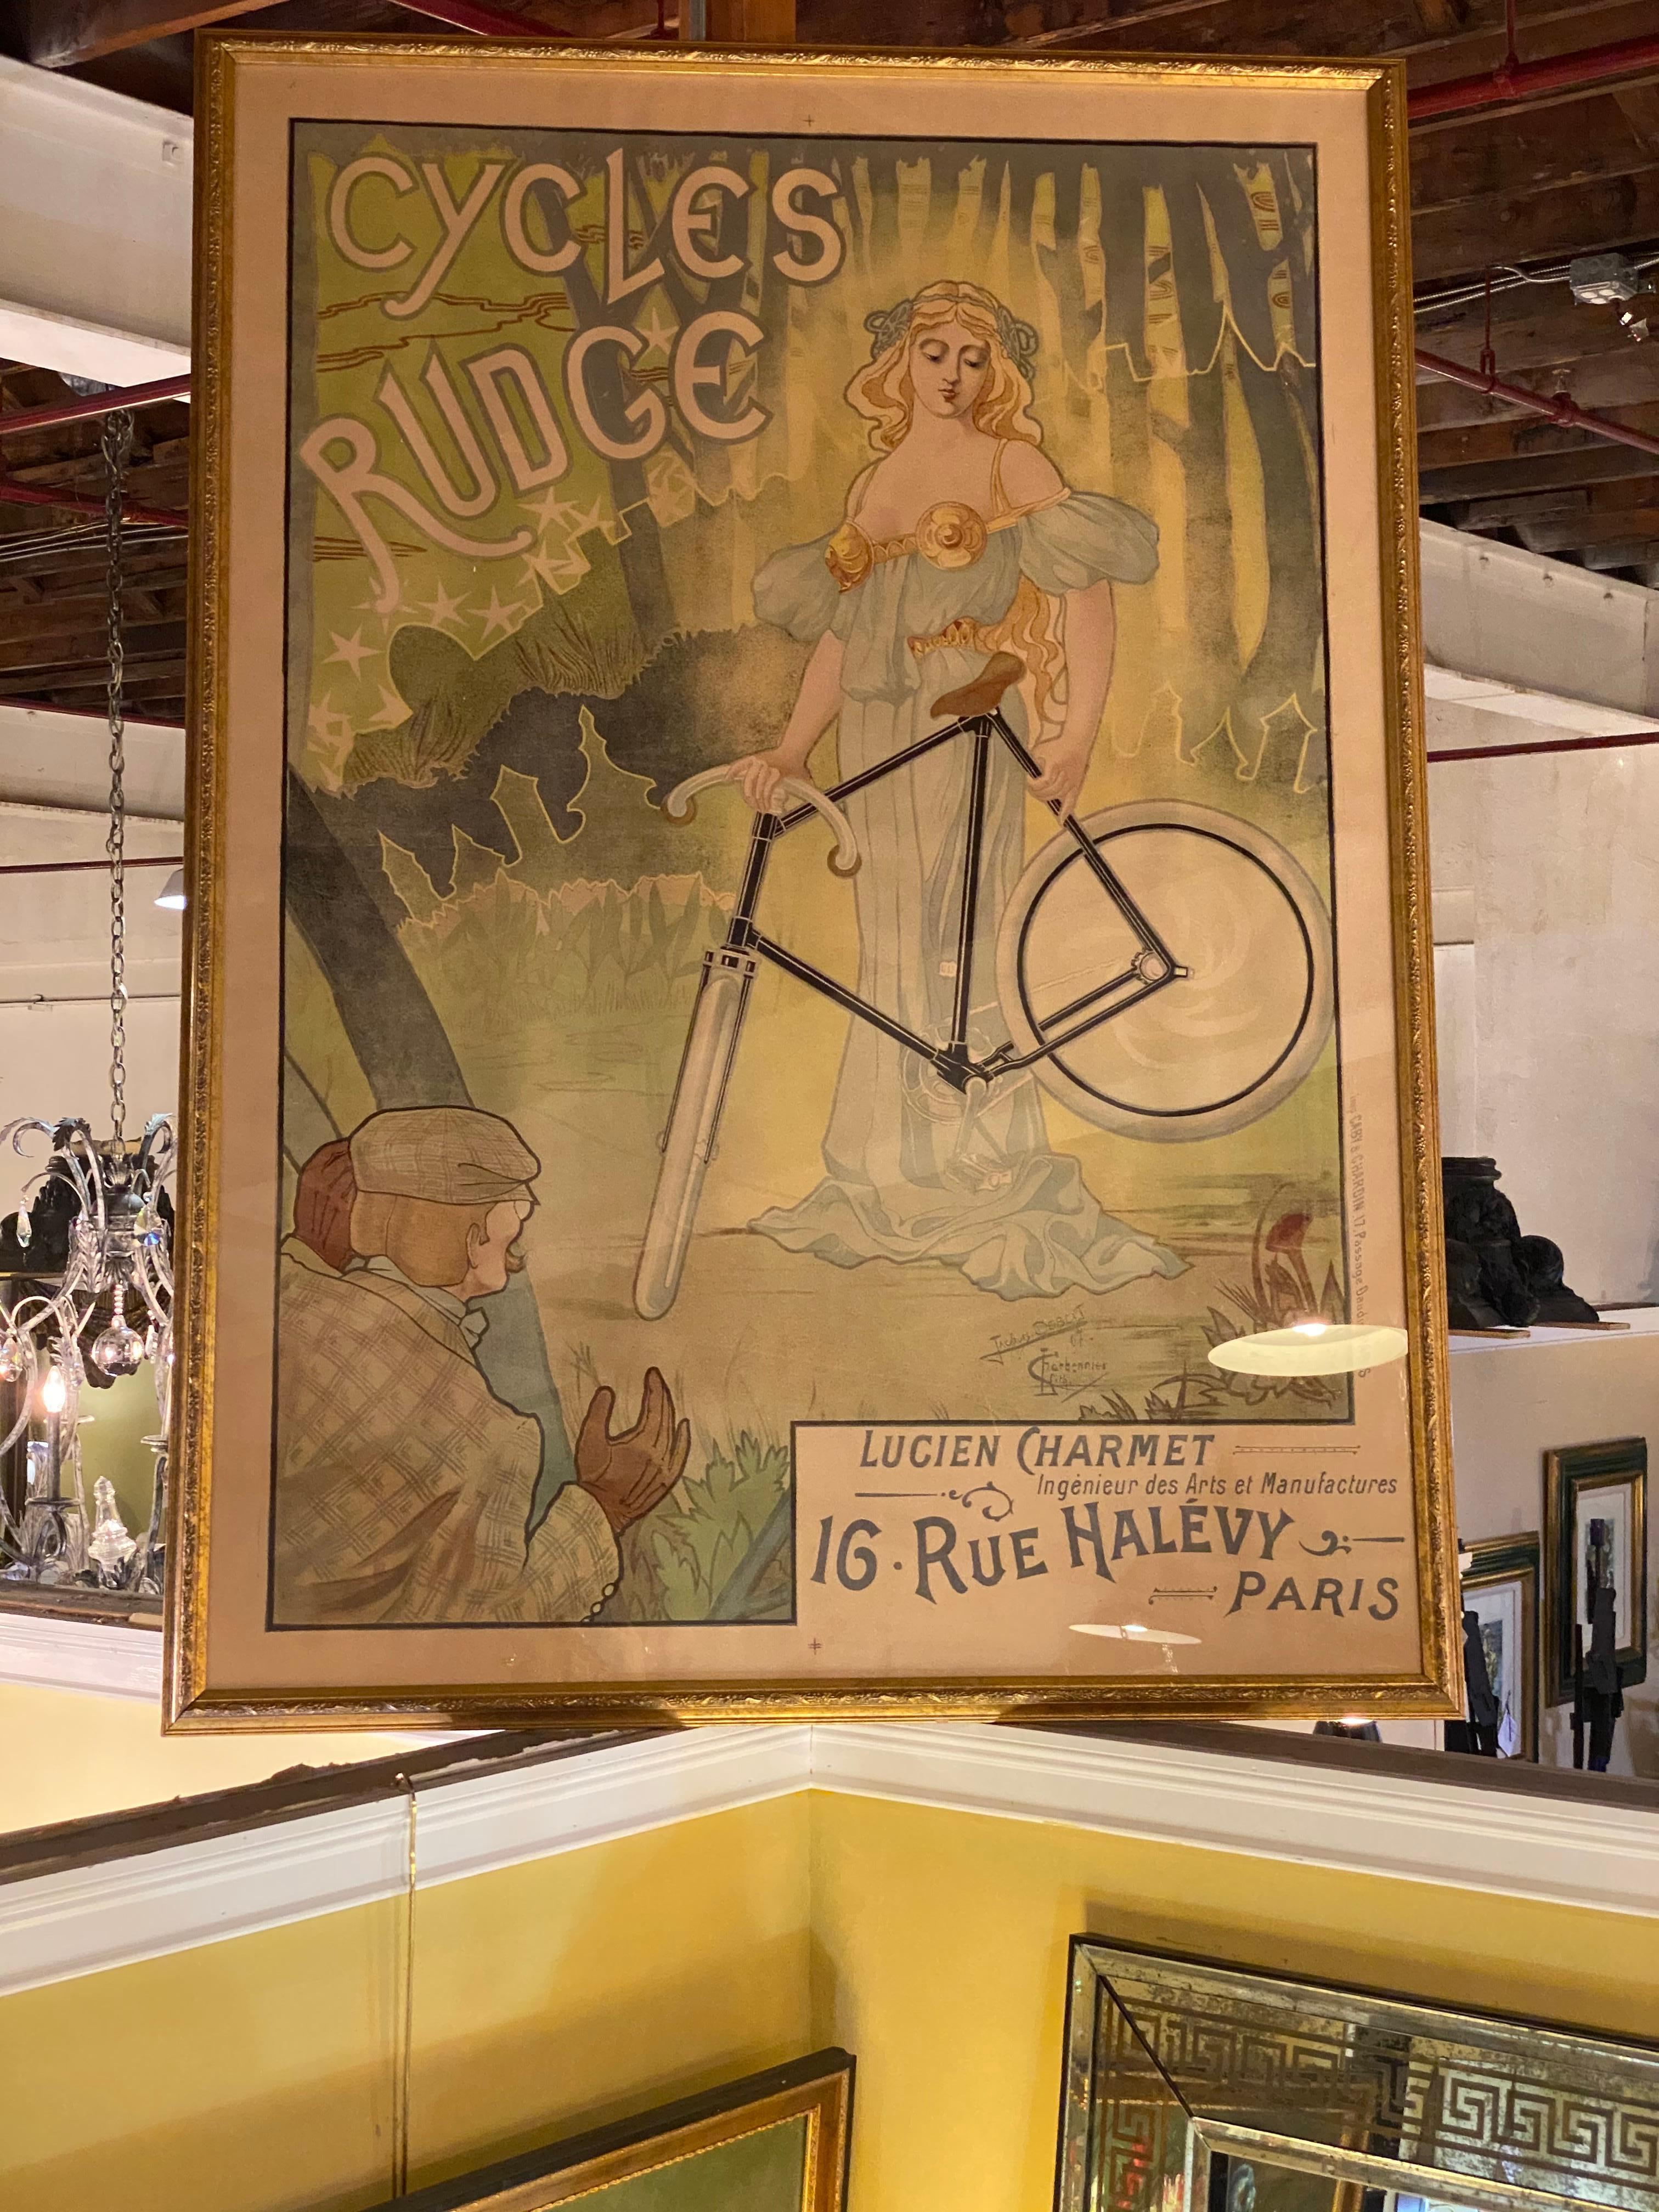 Jacques Debut Cycles Rudge Lucien Charmet Vintage Poster Framed 2